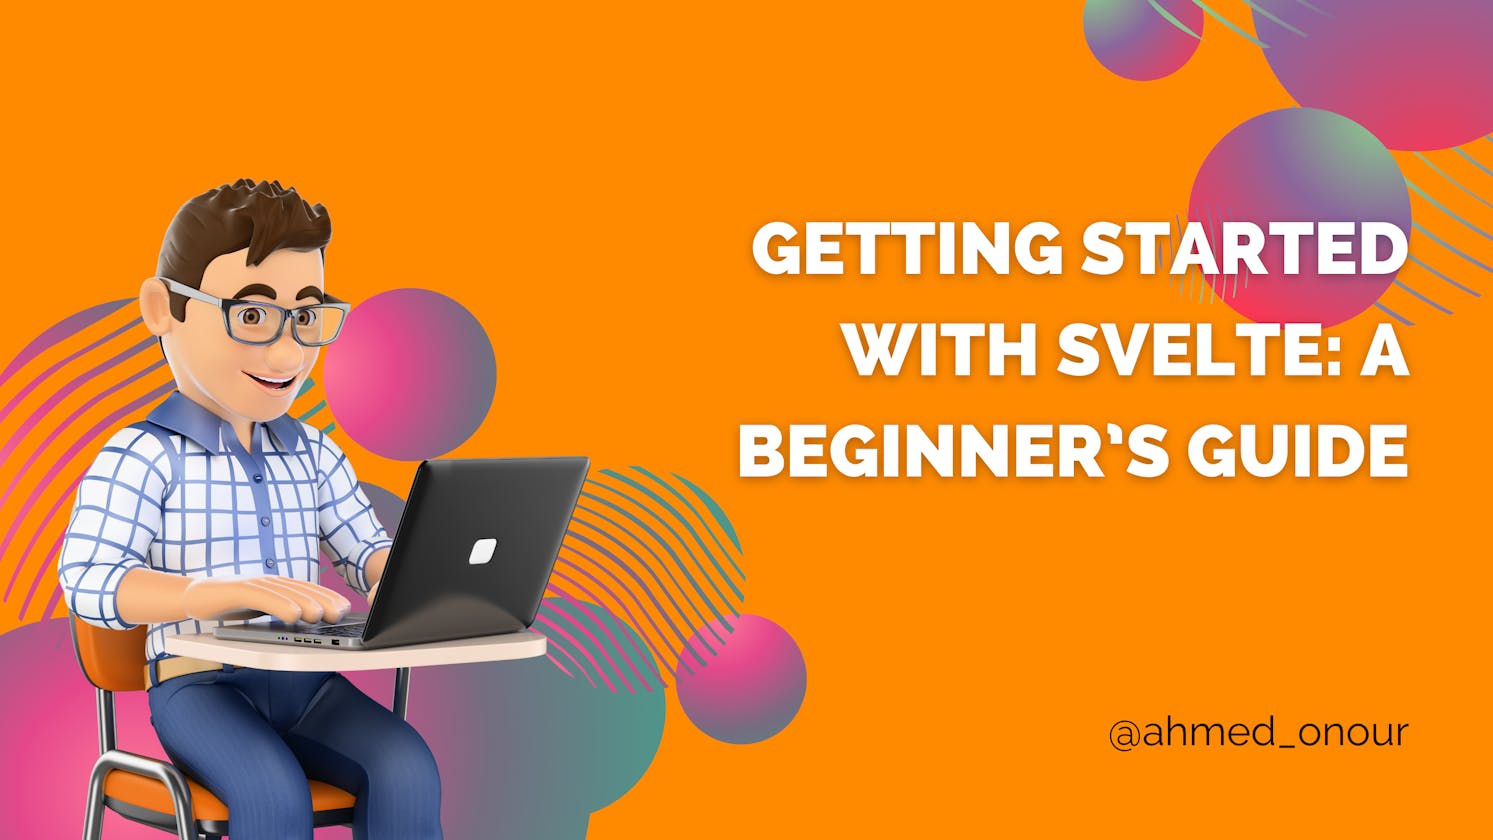 Getting Started with Svelte: A Beginner’s Guide